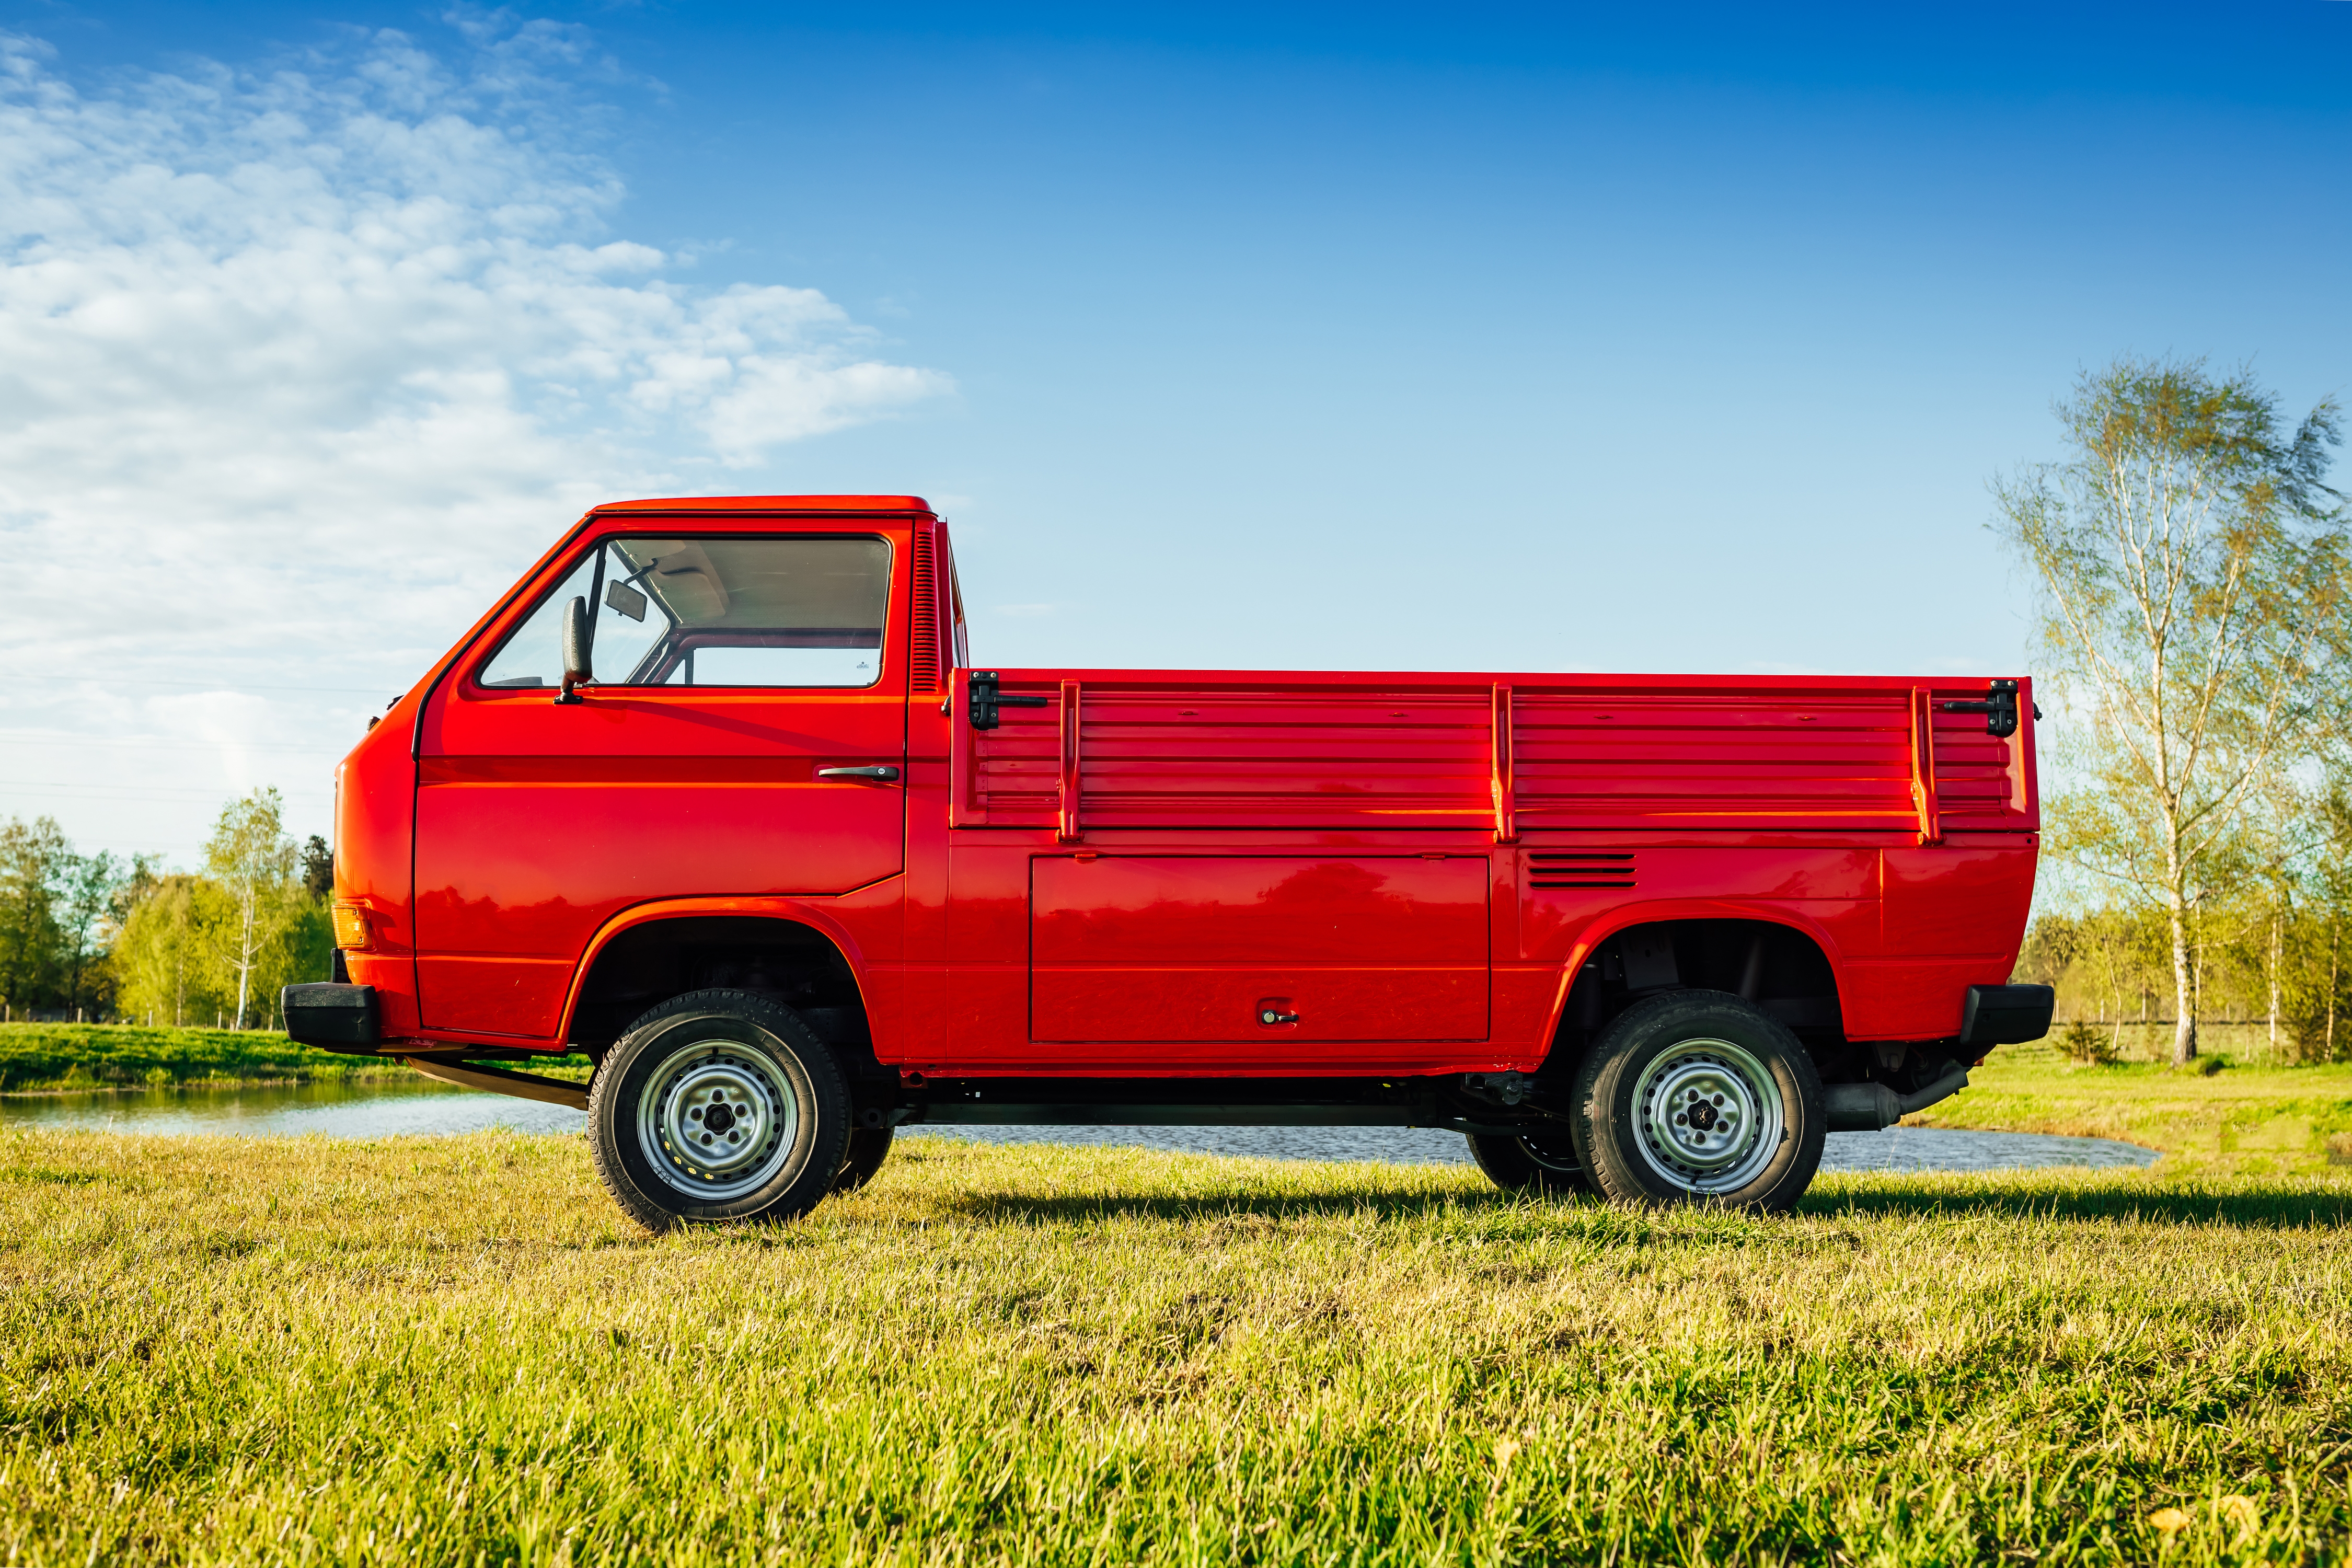 A mini truck parked on a green field. Commercial vehicle loans provided by IndoStar Capital Finance.